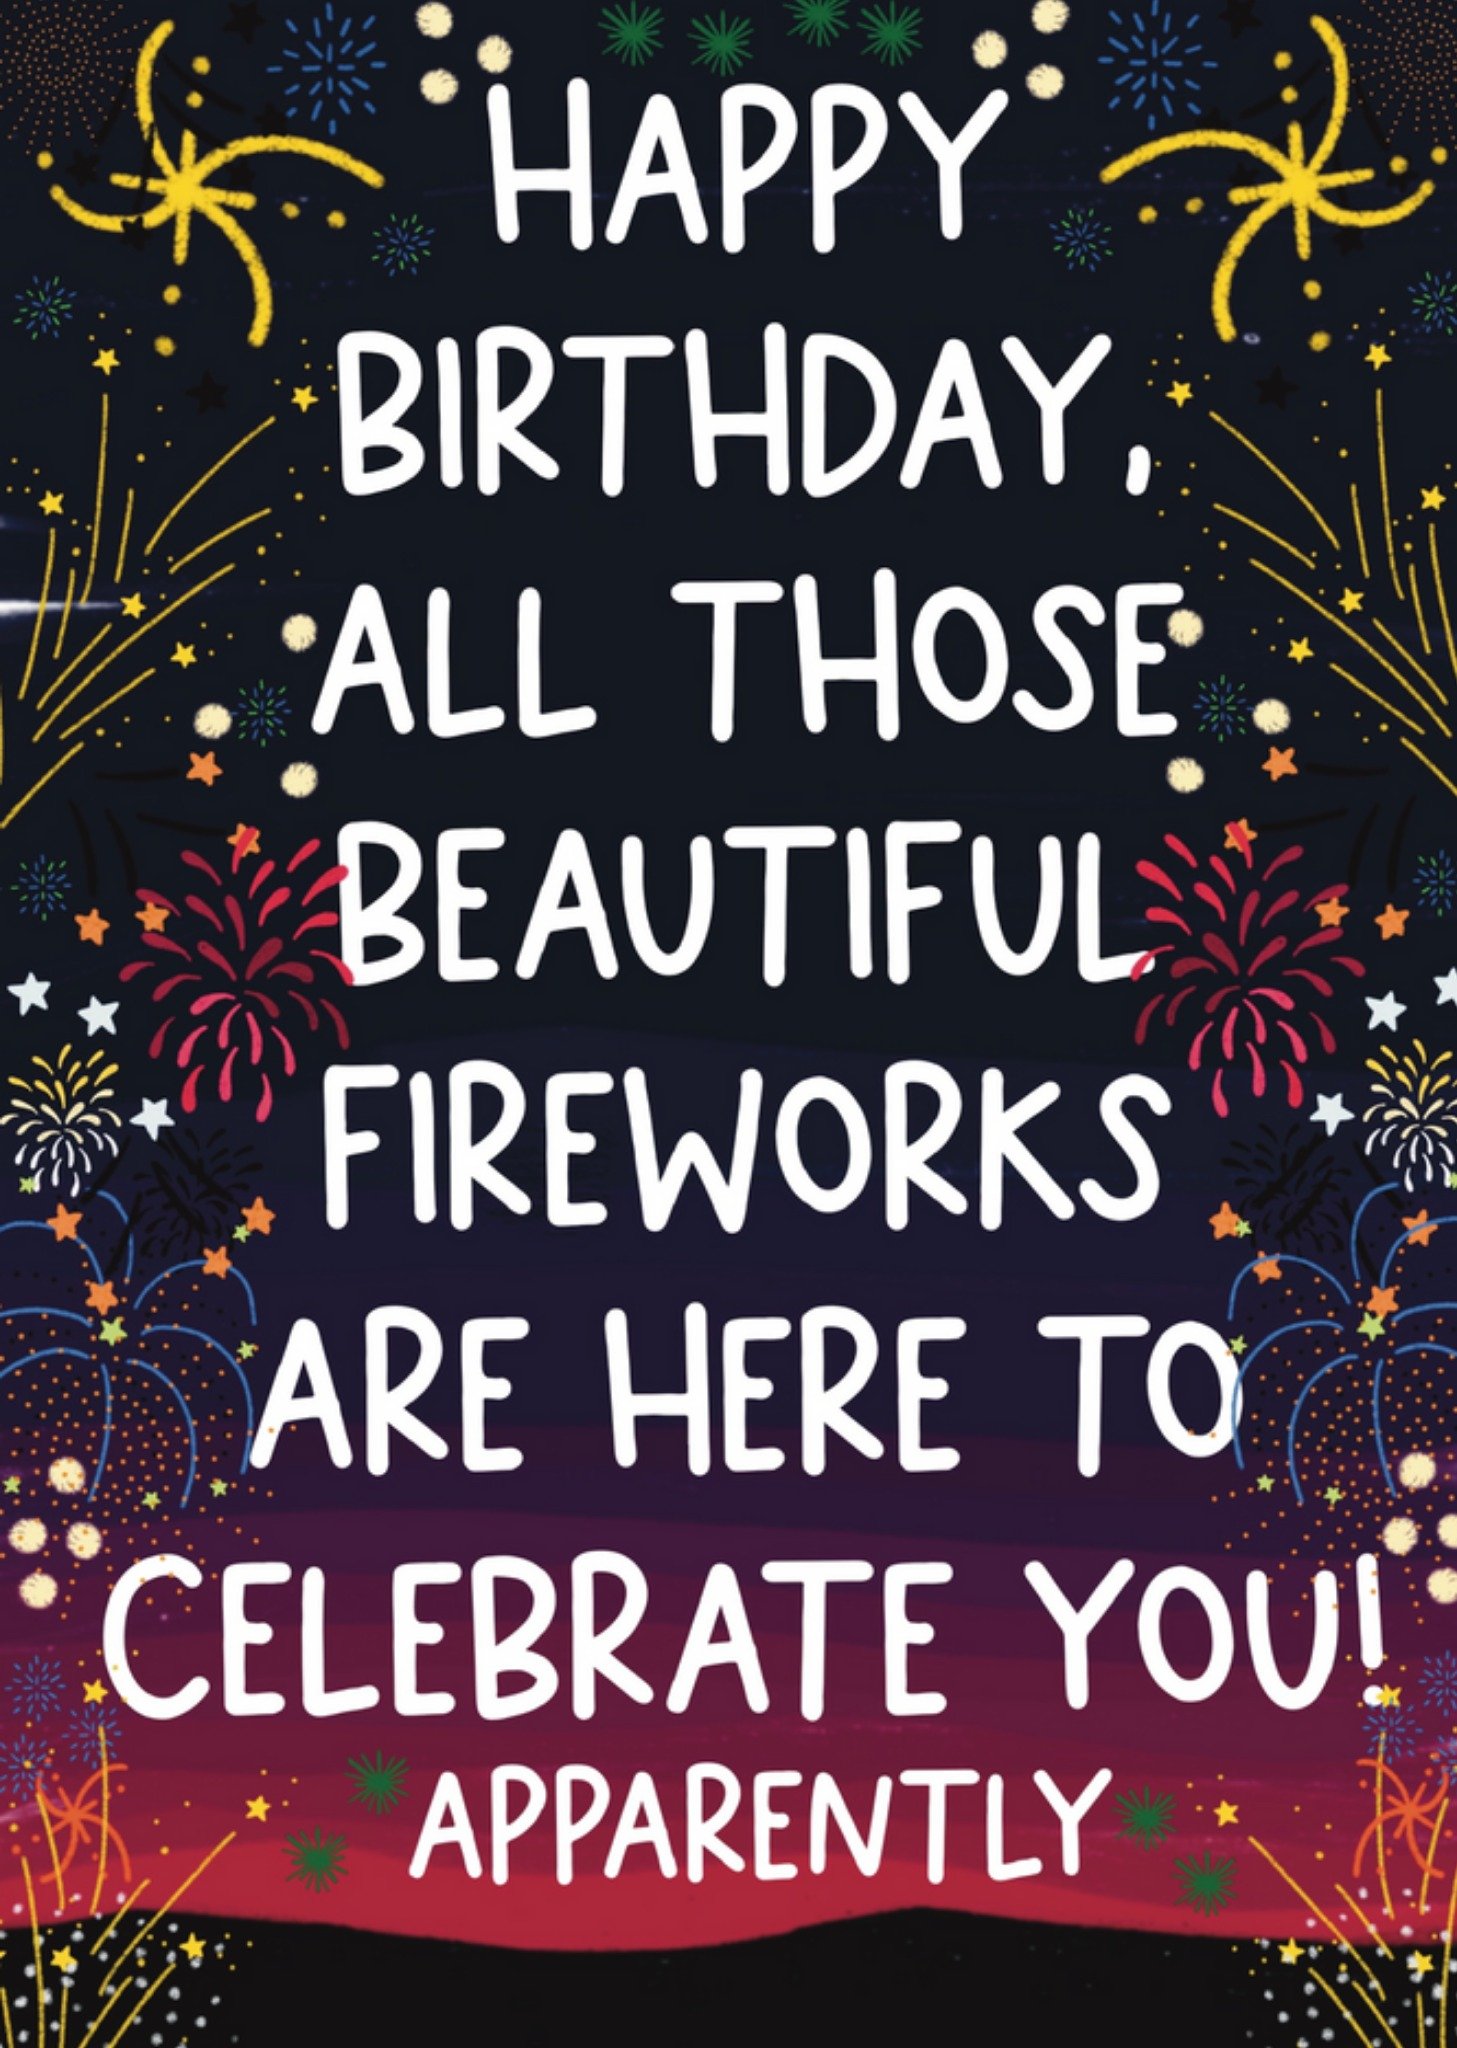 Moonpig Beautiful Fireworks Are Here To Celebrate You Birthday Card Ecard